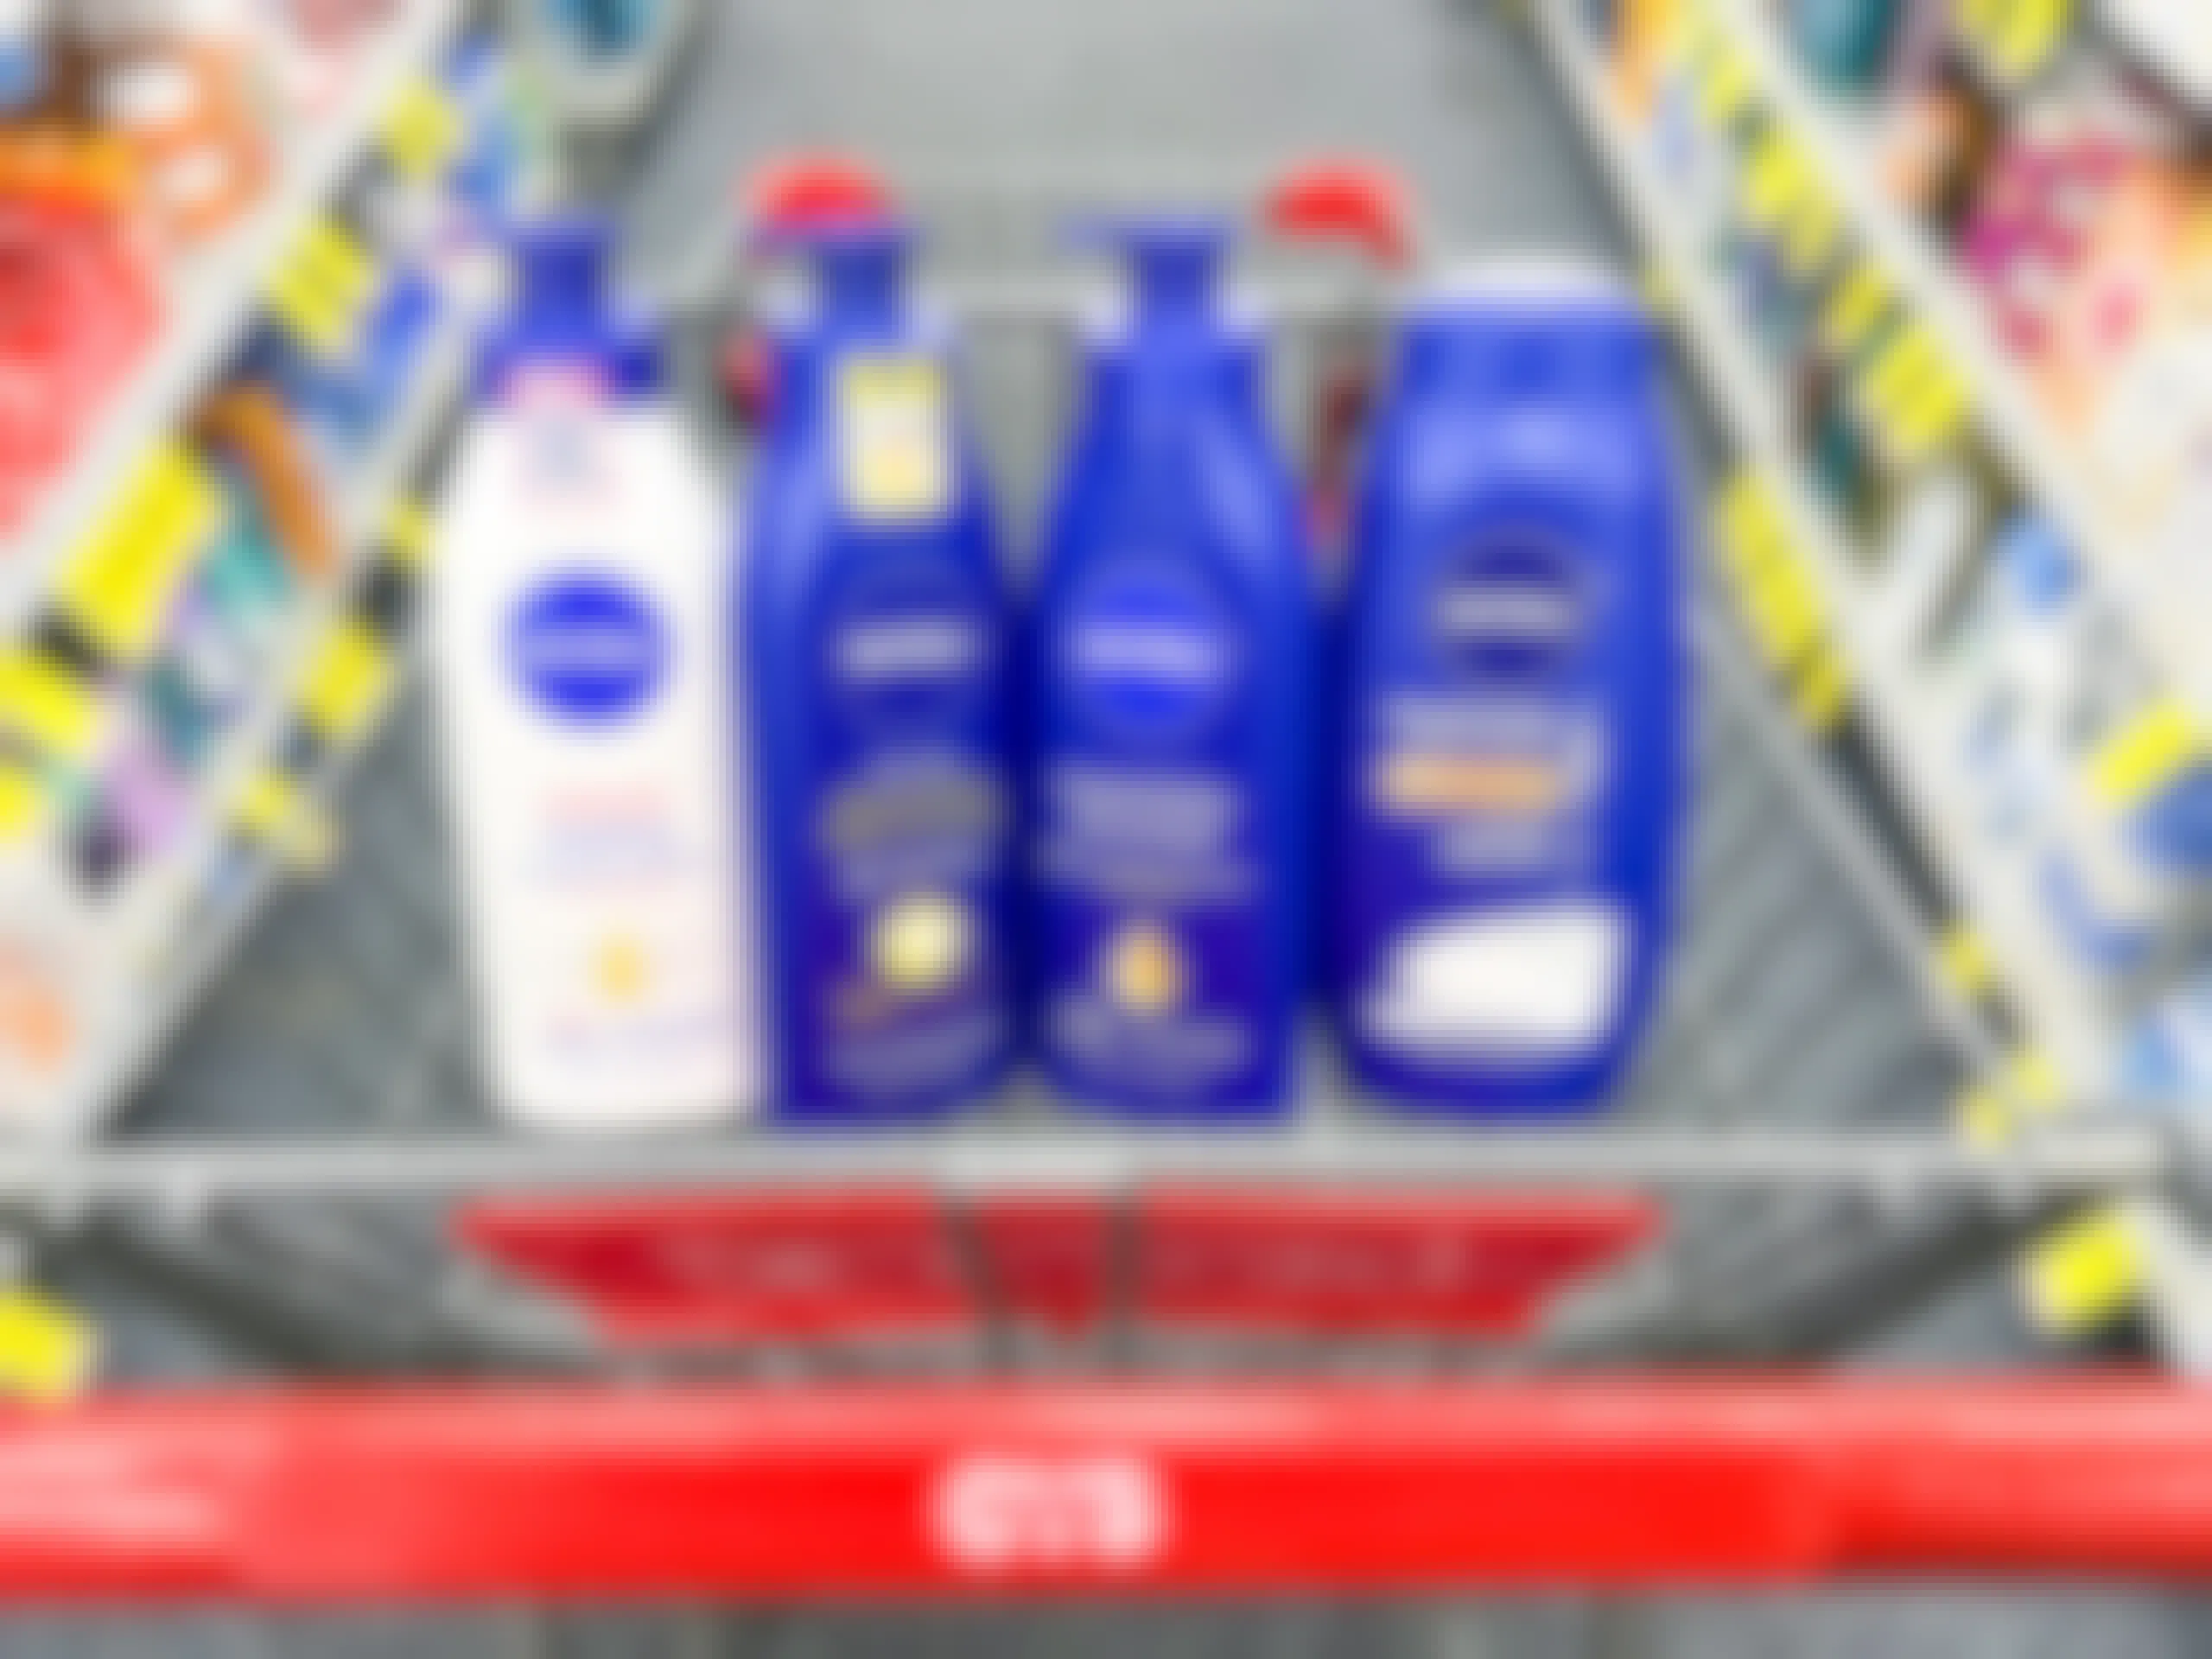 bottles of nivea lotion and body wash in a cvs cart